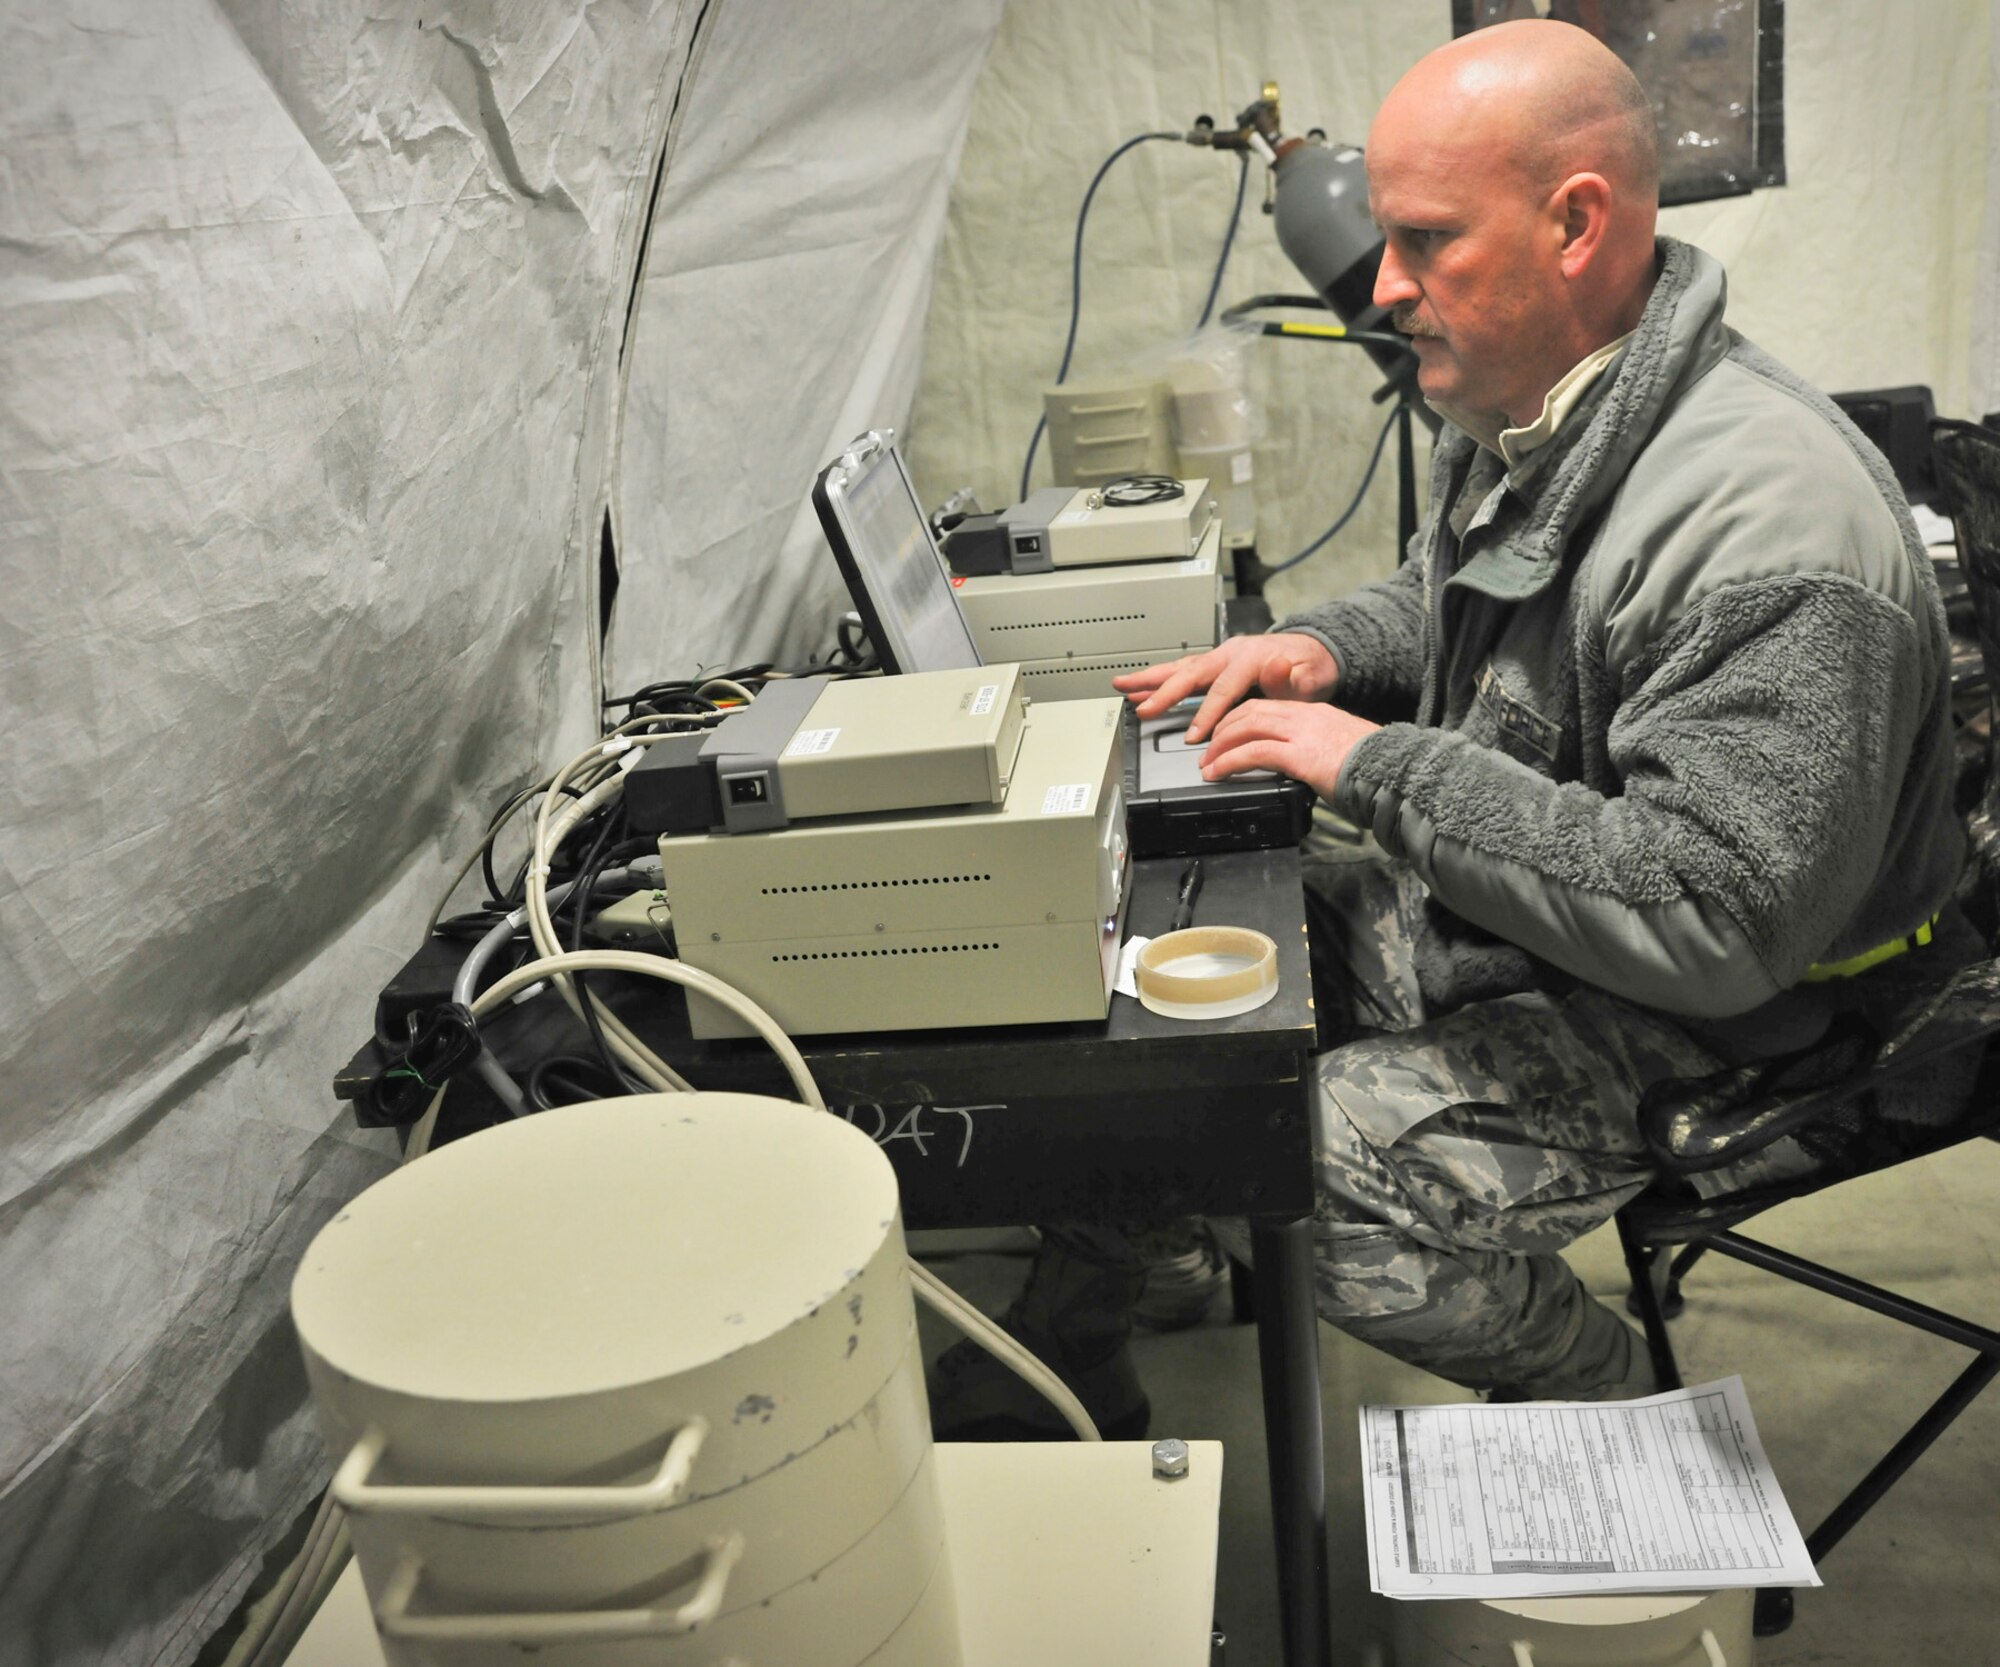 YOKOTA AIR BASE, Japan -- Master Sgt. Ty Richards, Air Force Radiation Assessment Team member, tests local water samples for radiation here March 25. The AFRAT currently supports Operation Tomodachi by ensuring drinking water is safe for use.  (U.S. Air Force photo/Airman 1st Class Andrea Salazar)